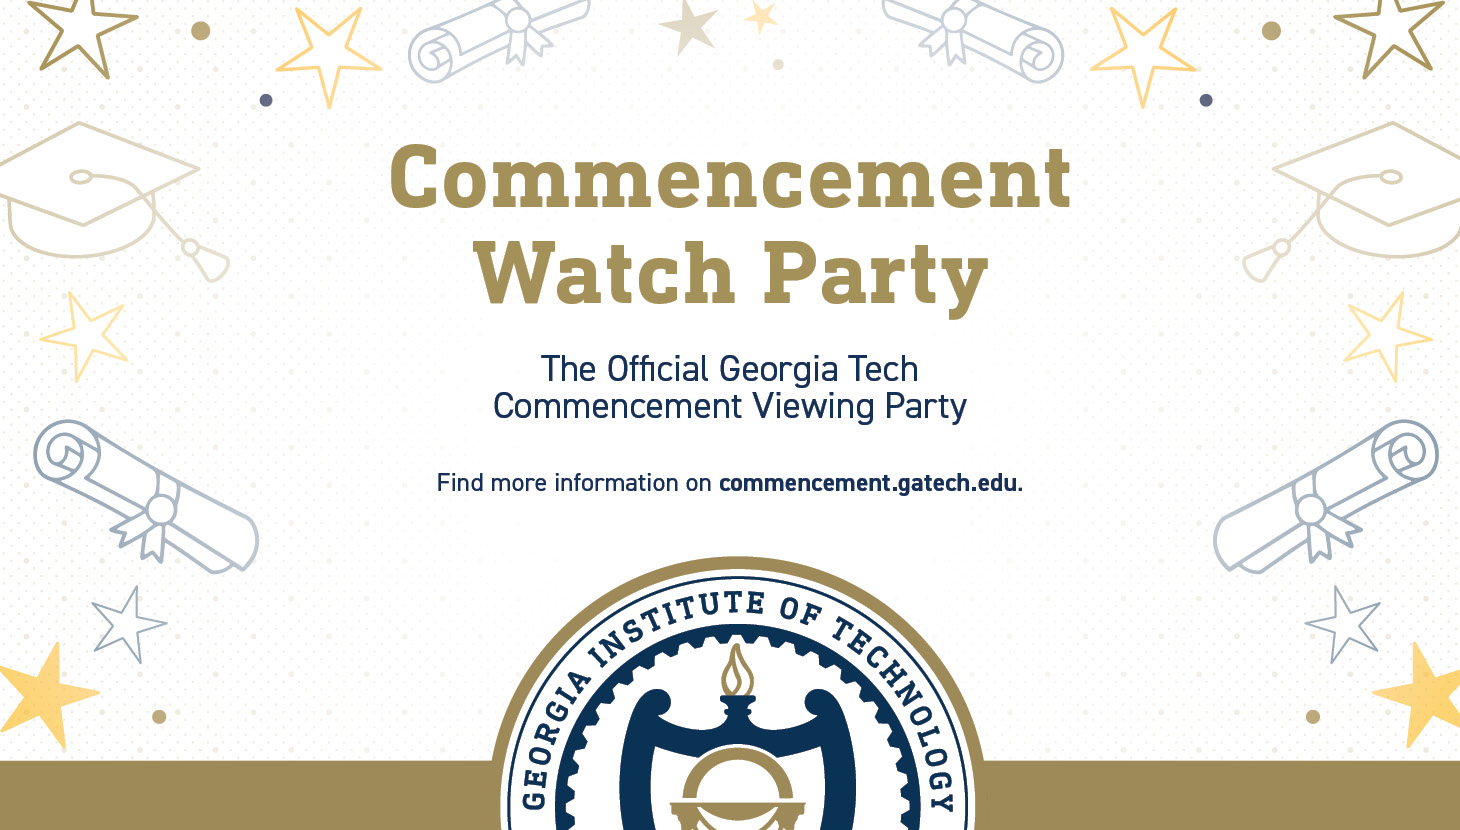 Commencement Watch Party